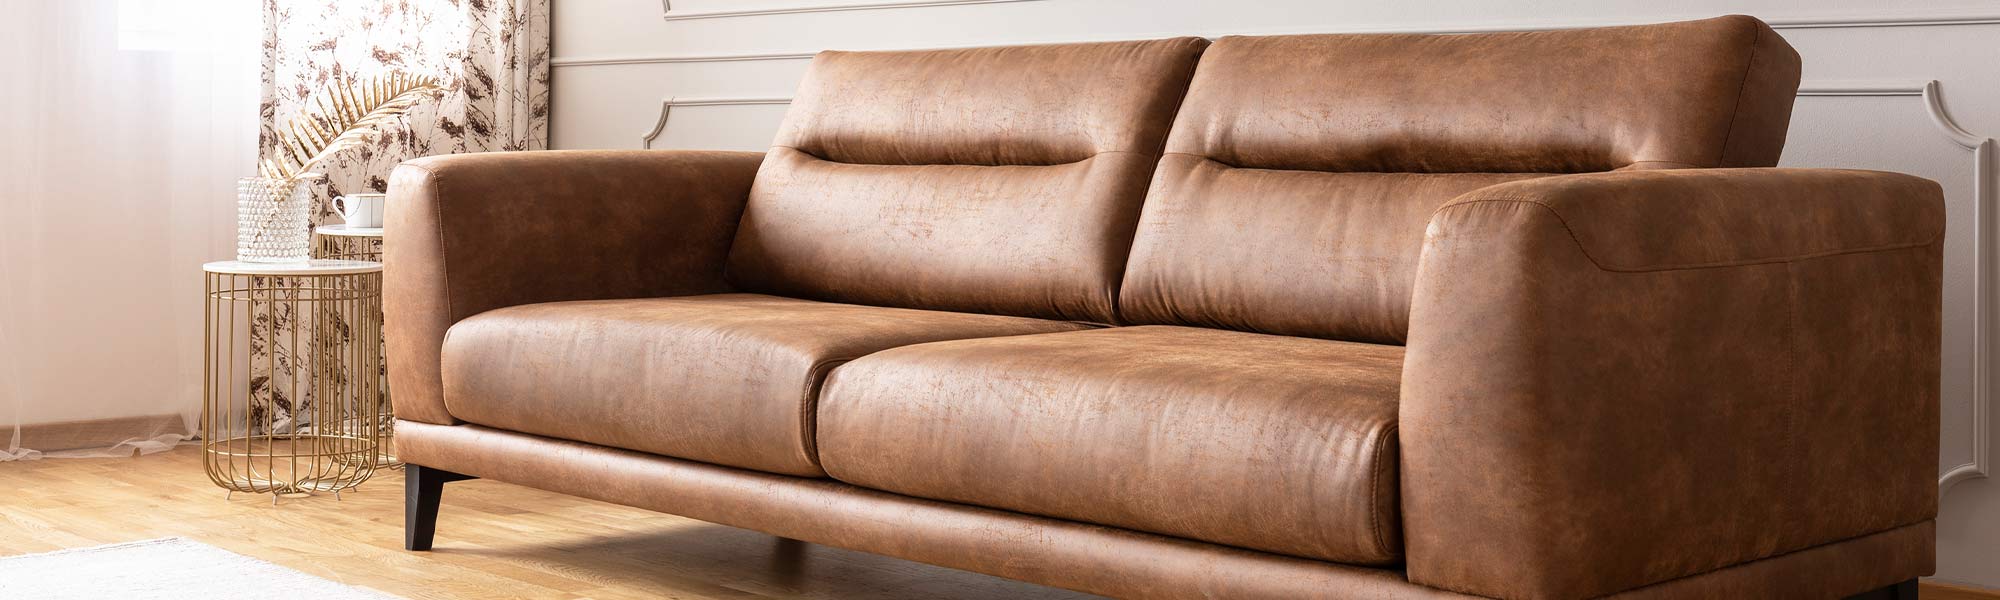 How To Remove Human Urine Smell From Leather Couch Leather Cleaning Service | Chem-Dry